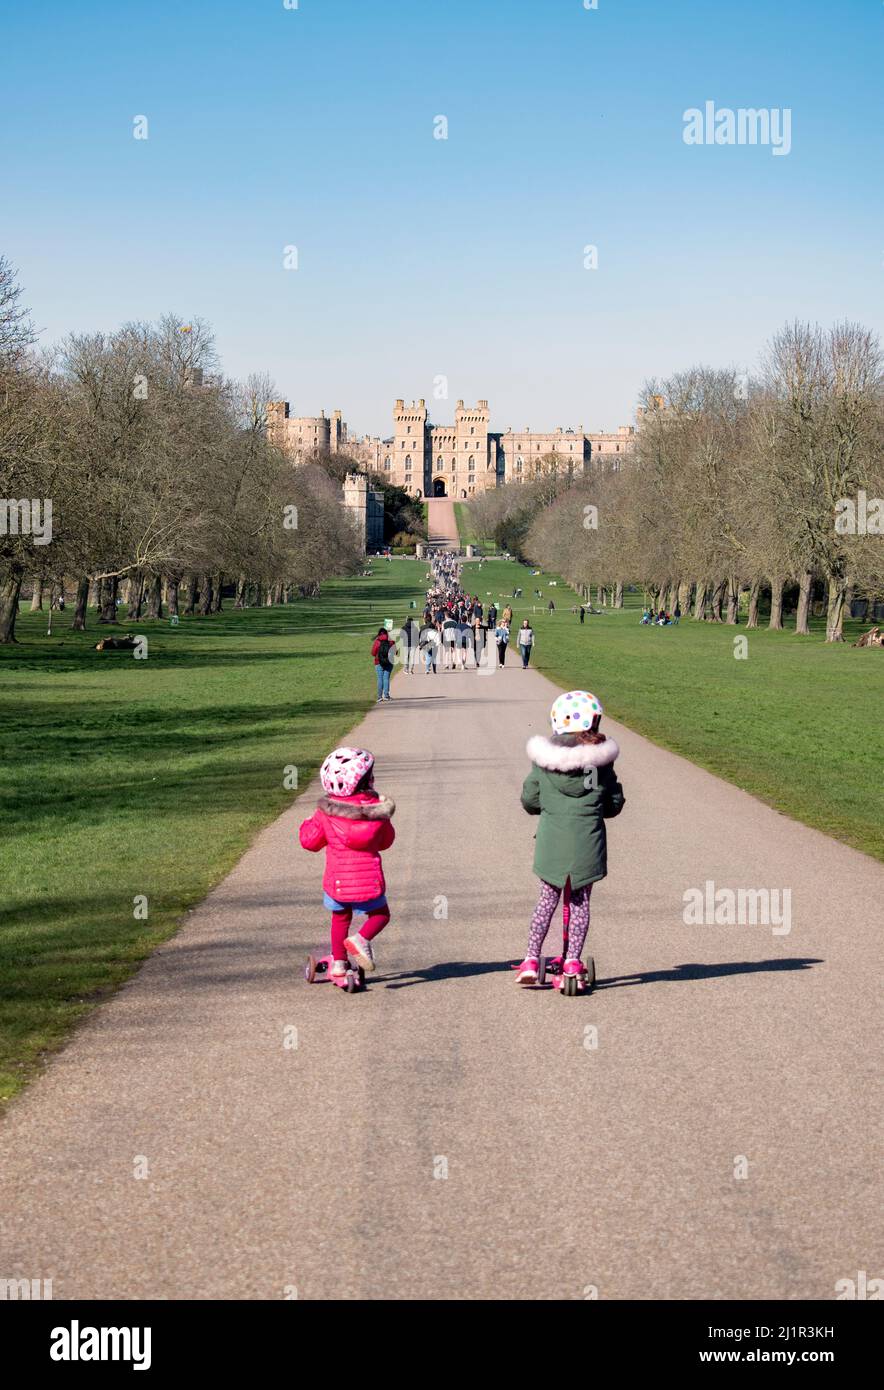 March 19th 2022 - Windsor, UK: Children riding scooters on The Long Walk at Windsor Castle Stock Photo